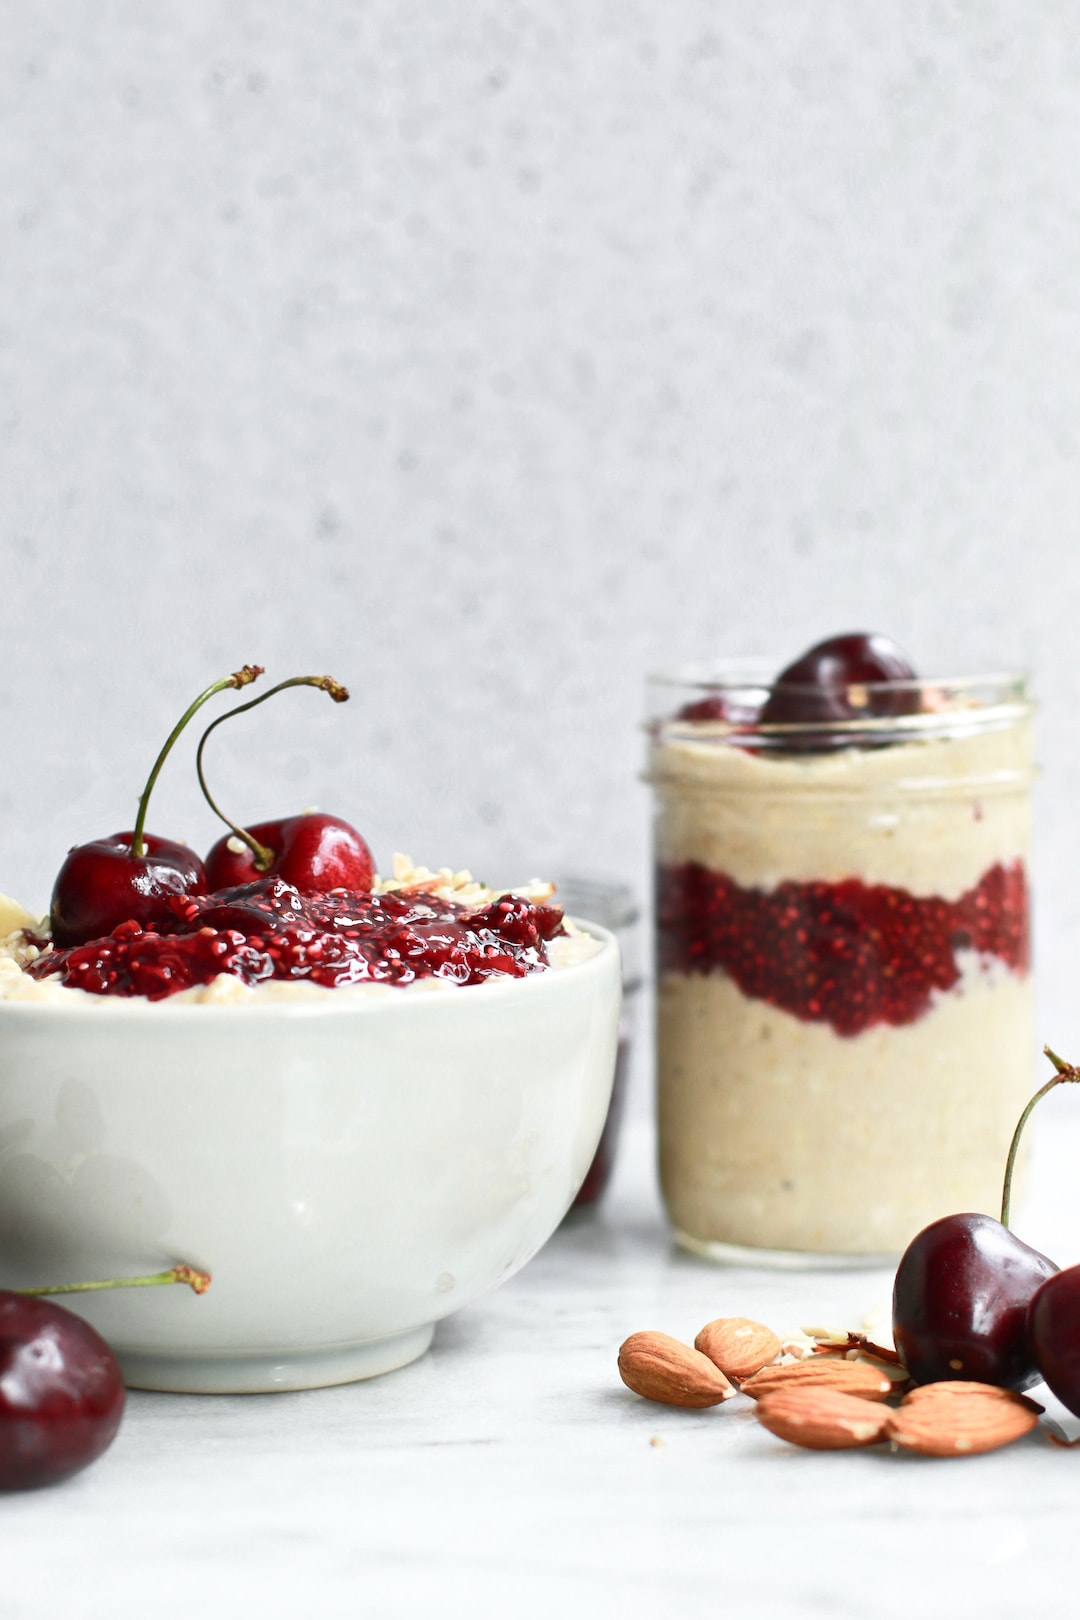 This Healthy Overnight Oats with Cherry Chia Seed Jam recipe is a must try for fast and rushed mornings. If you love dairy free overnight oats and cherries this is a simple vegan breakfast packed with protein and suitable for clean eating that you’ll absolutely love! Use gluten free rolled oats to keep this breakfast gluten free friendly and switch up the cherries for other berries like blueberry and raspberry at other times of year when cherries aren’t in season!